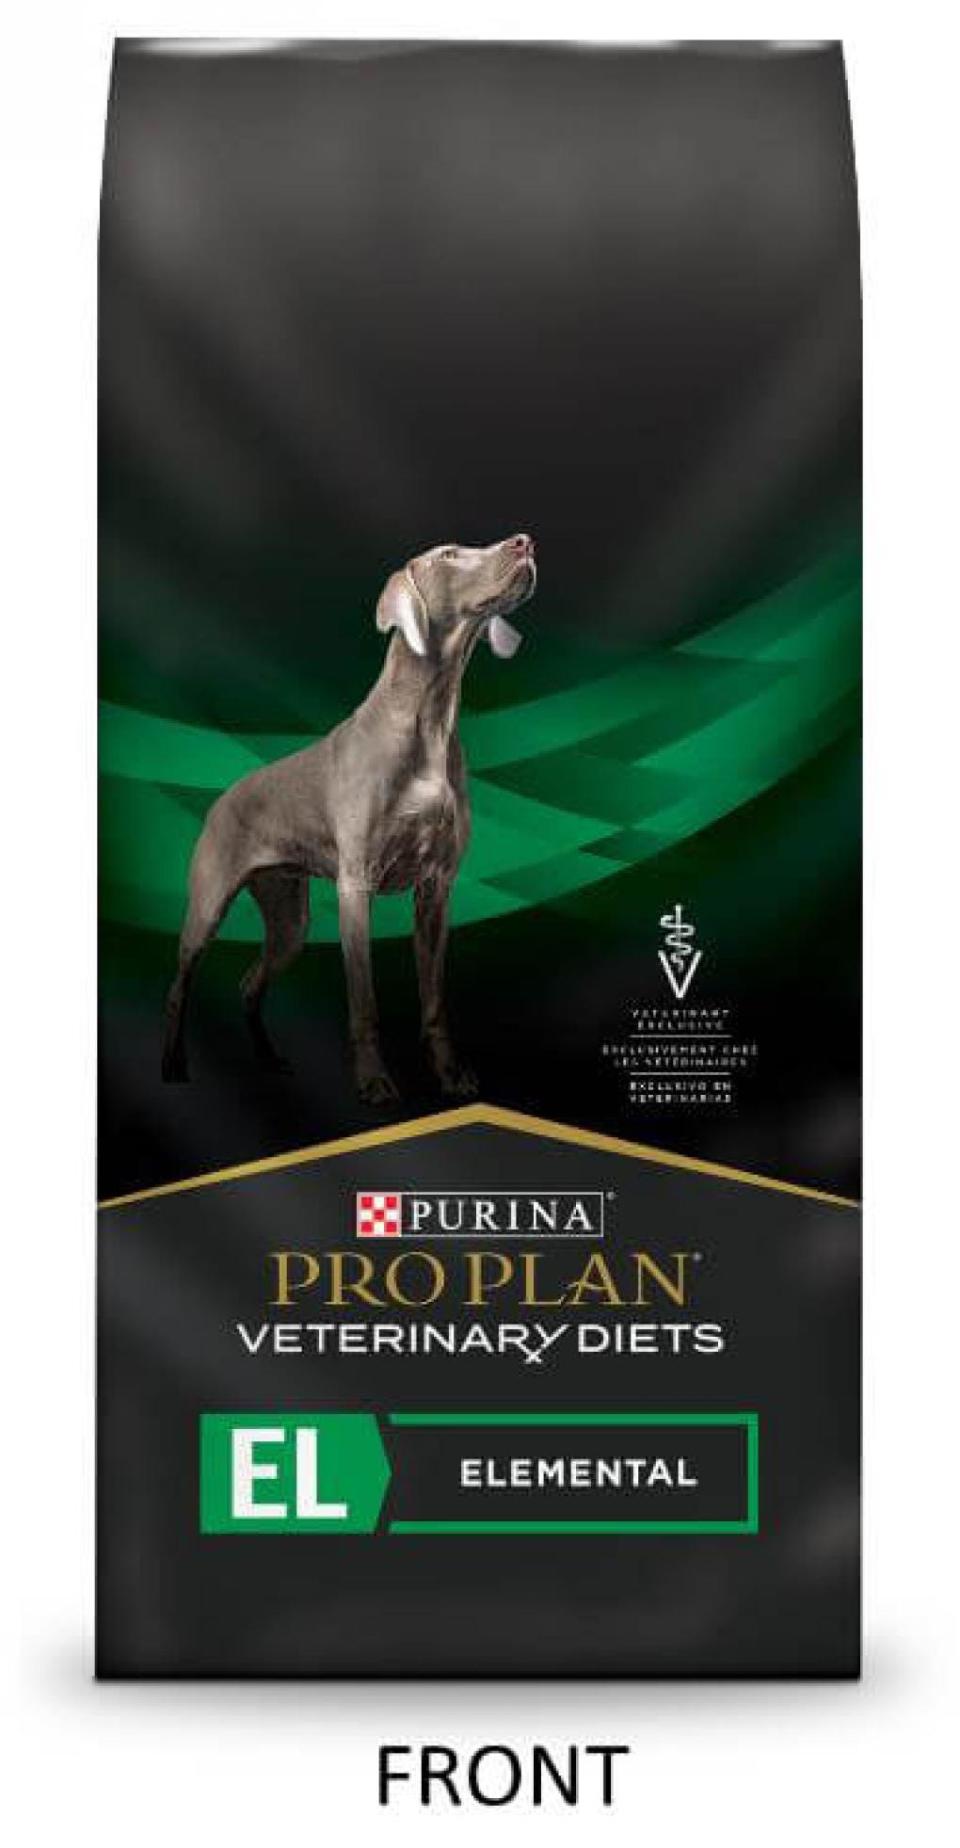 Some Purina Pro Plan Veterinary Diets El Elemental dog food is being recalled because it might have elevated levels of Vitamin D, the U.S Food and Drug Administration reported on February 8. 2023.